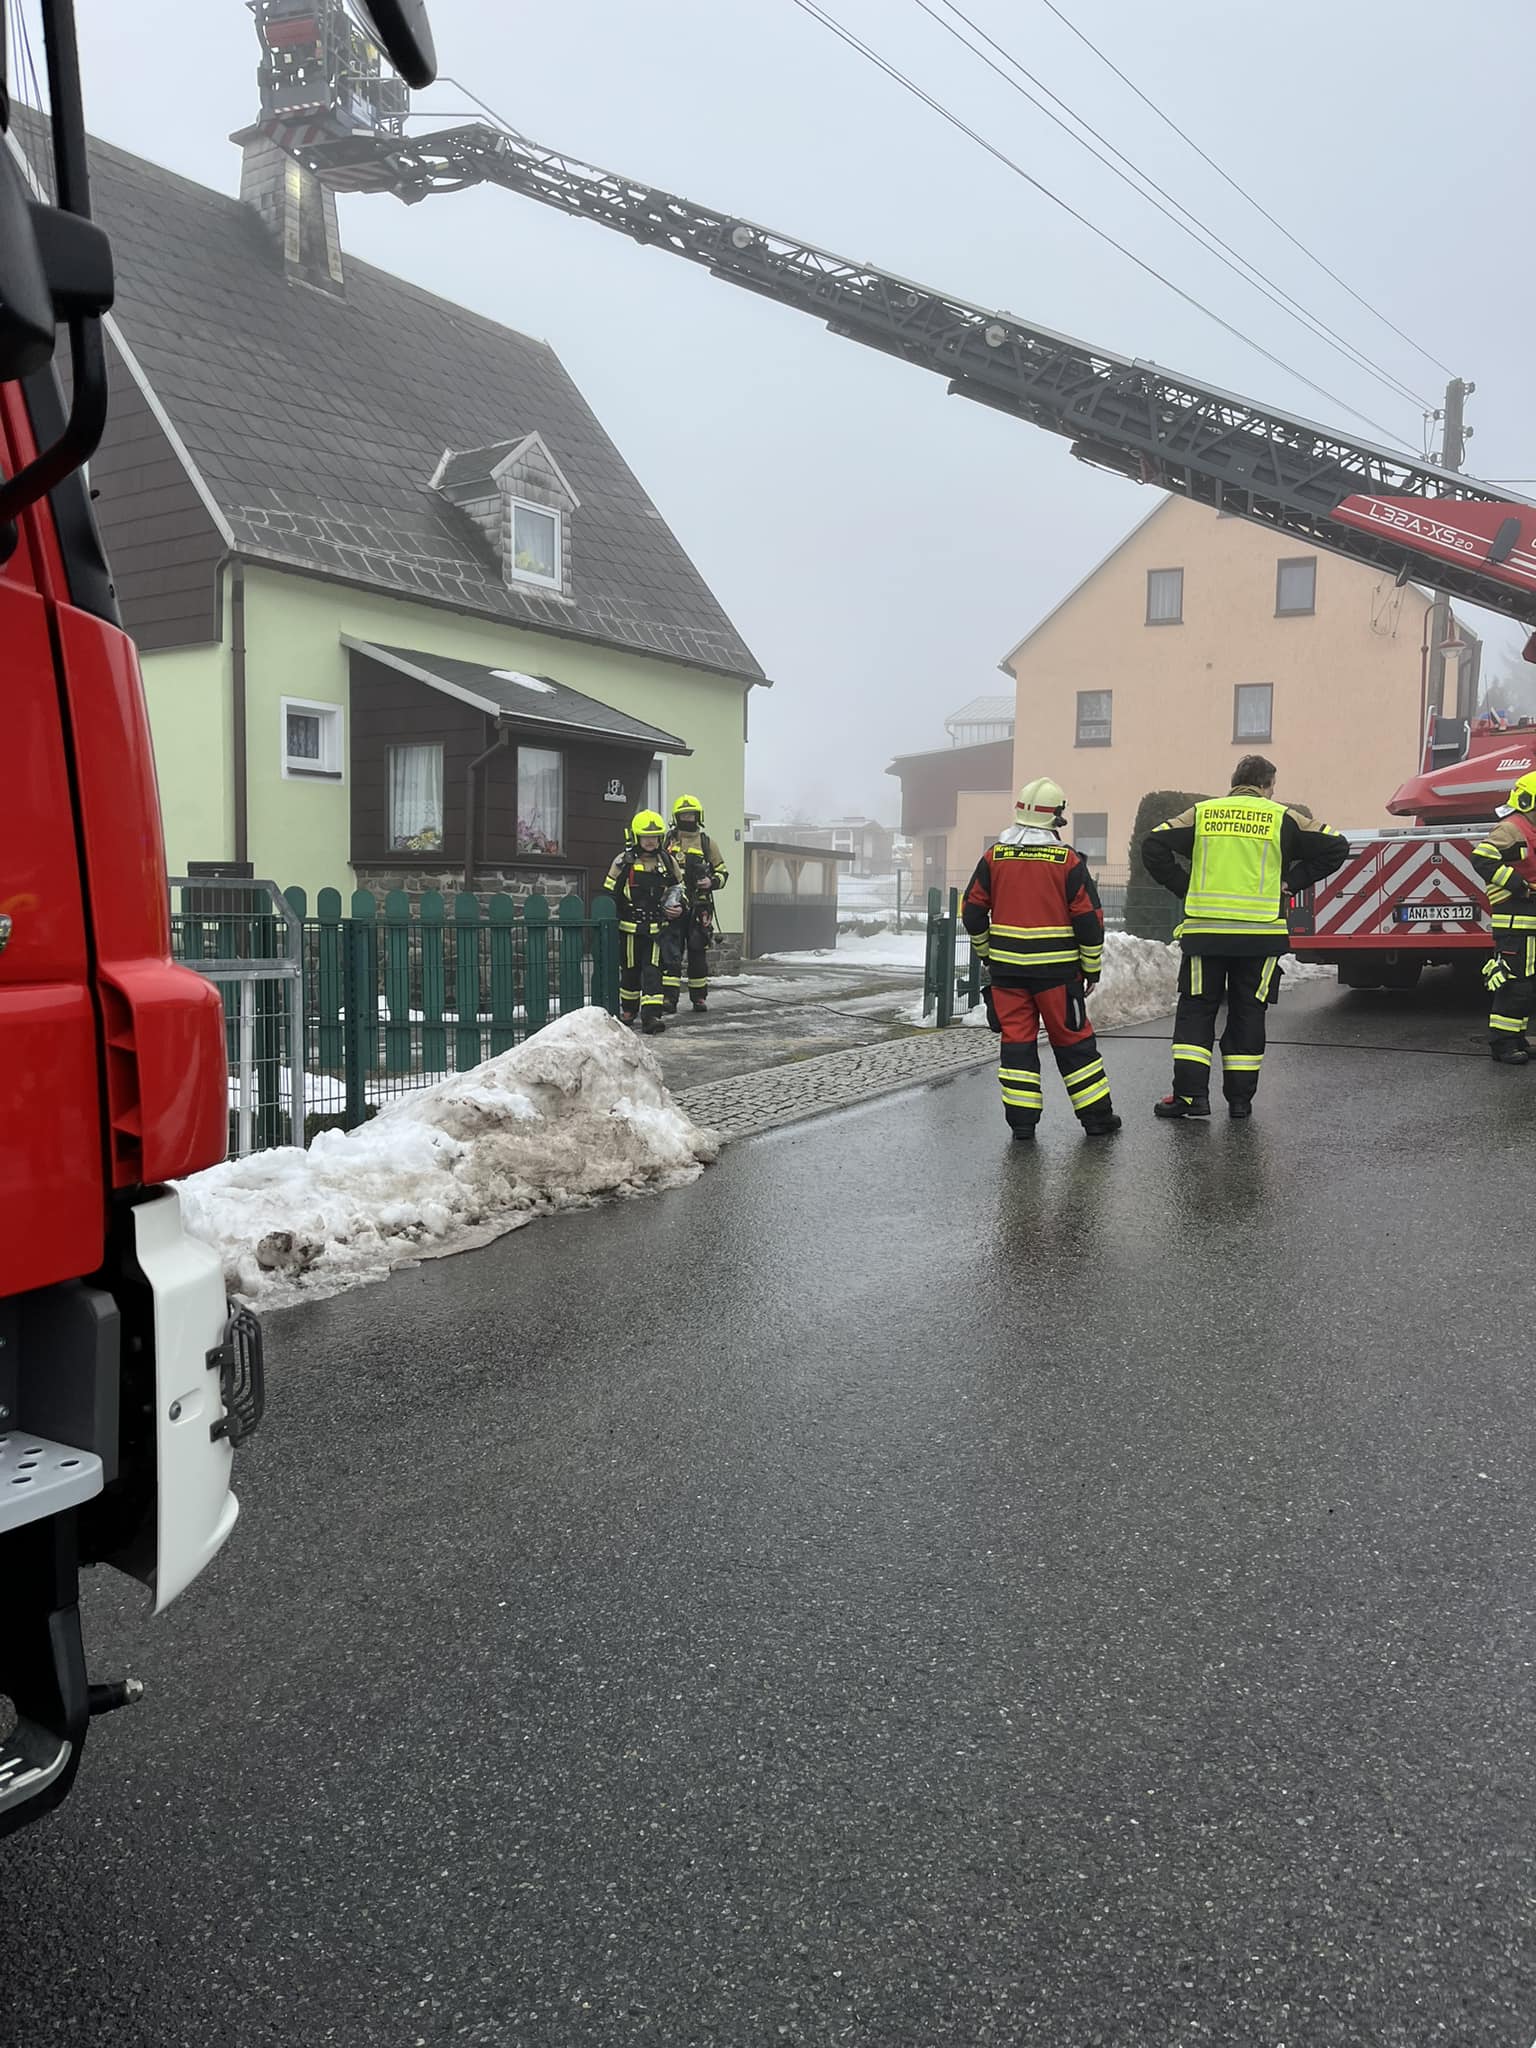 You are currently viewing Brand 2 – Crottendorf – Schornsteinbrand